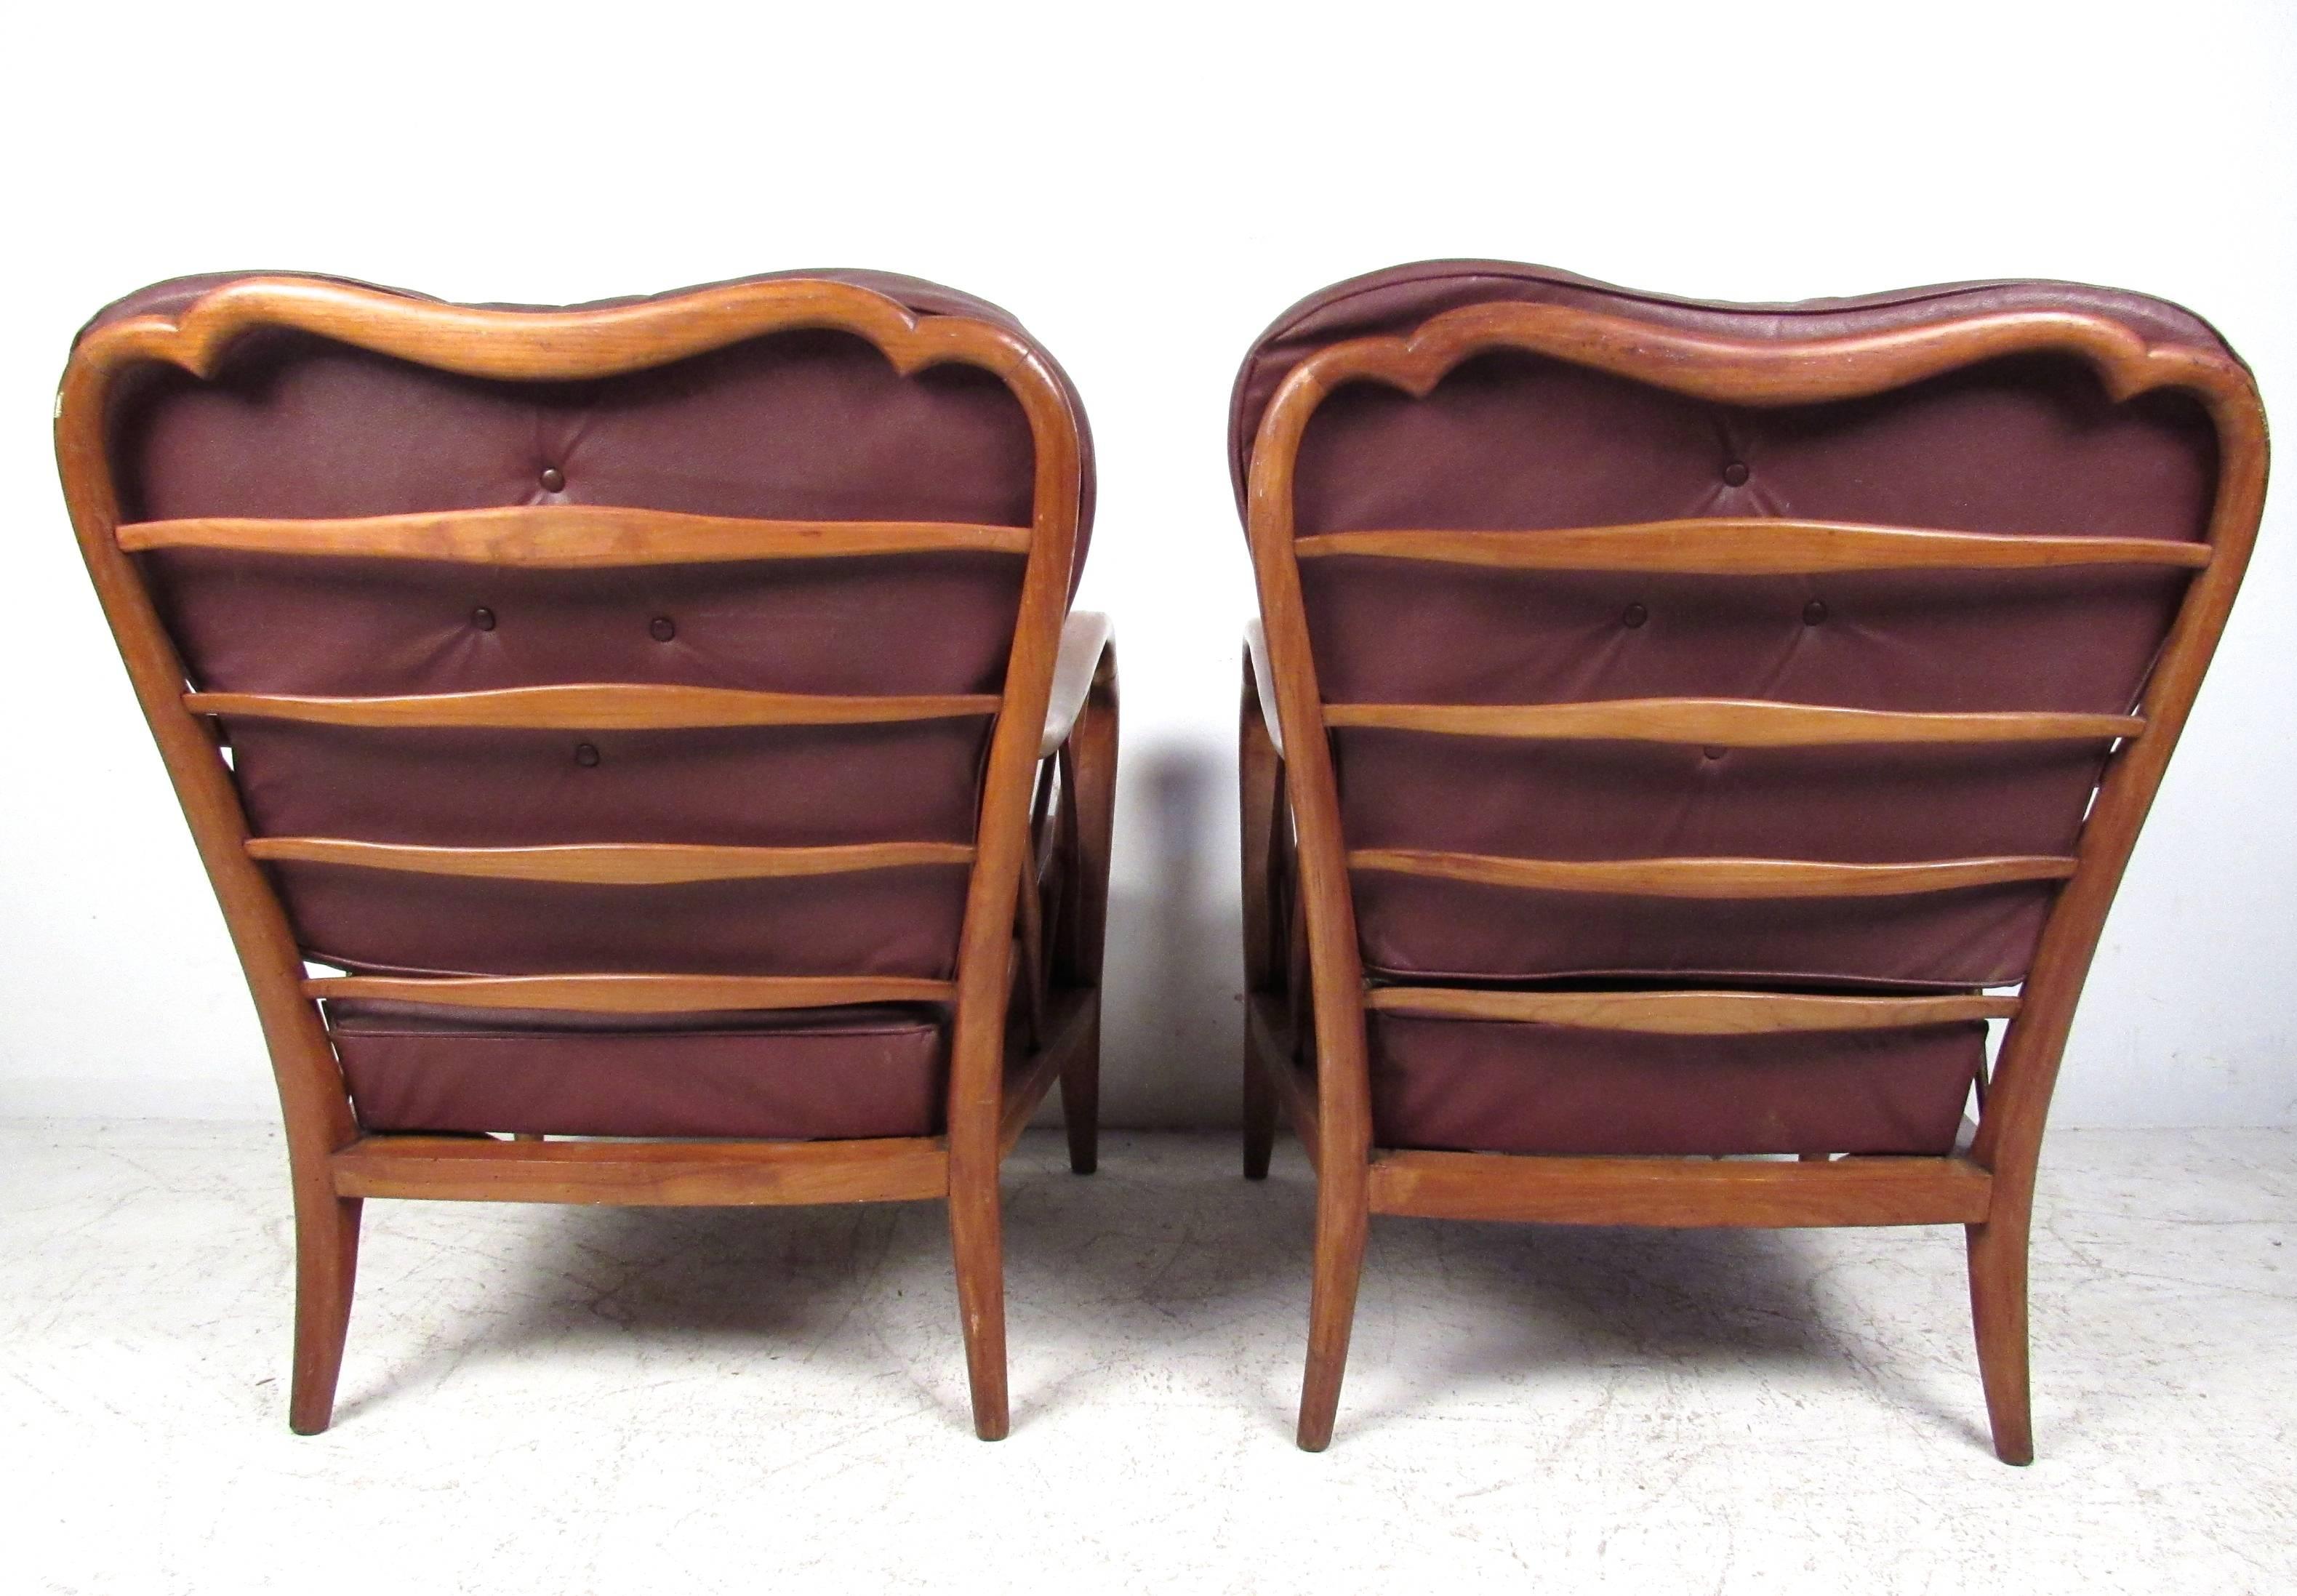 This uniquely styled pair of vintage wood frame armchairs feature a rare collection of features, including sculptural seat backs and frames, with. Tapered legs, shaped seat cushions, and intricate design throughout the woodwork showcase the